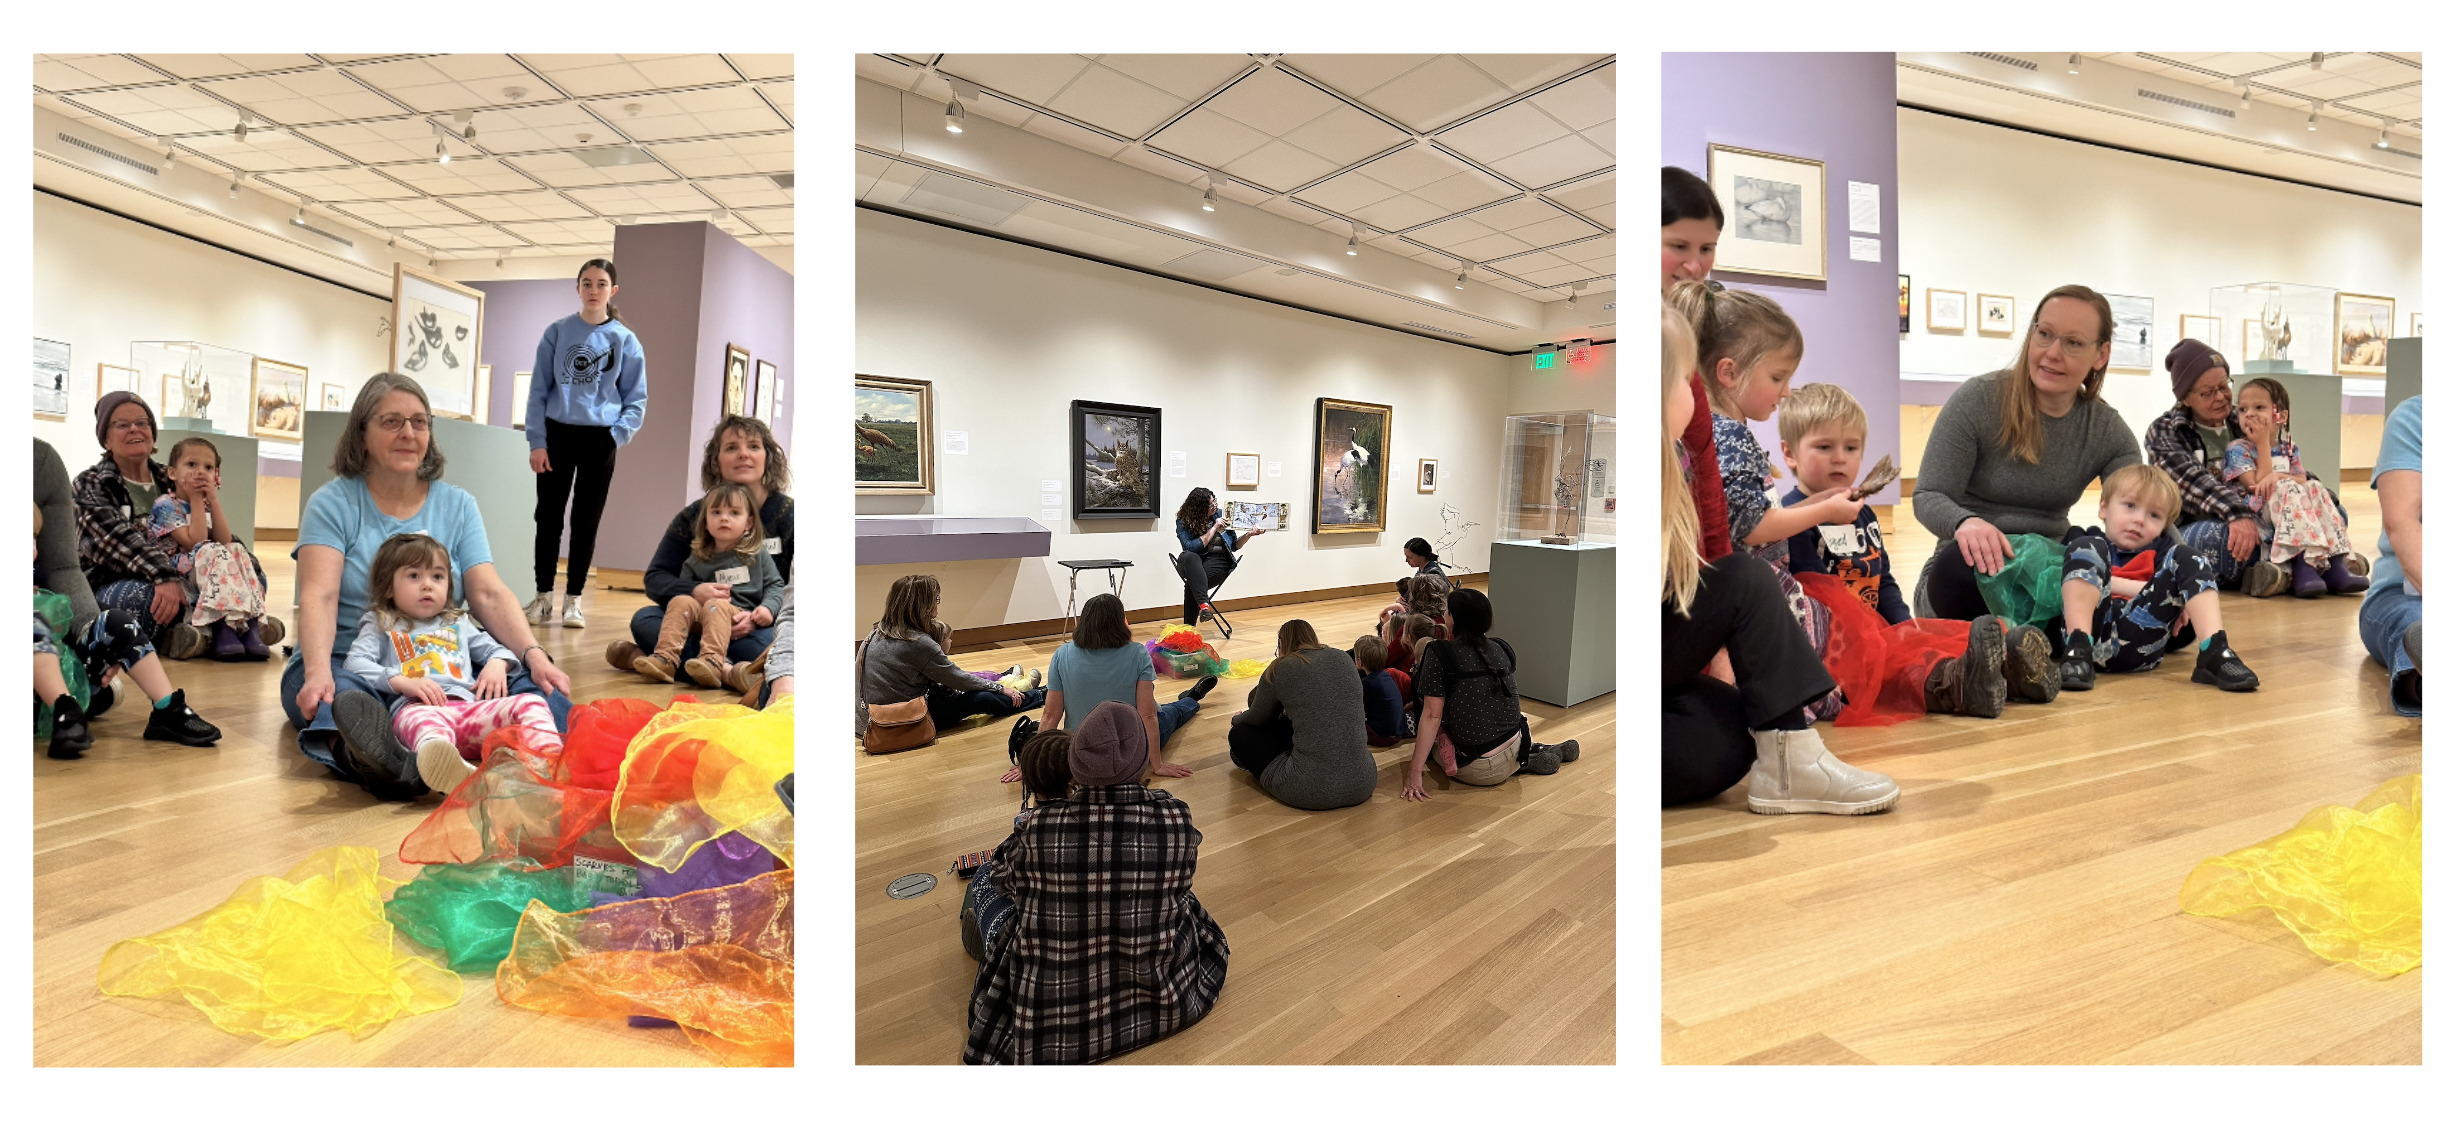 Toddlers and parents enjoy time in the gallery with tour props, scarves to dance with, and story time.